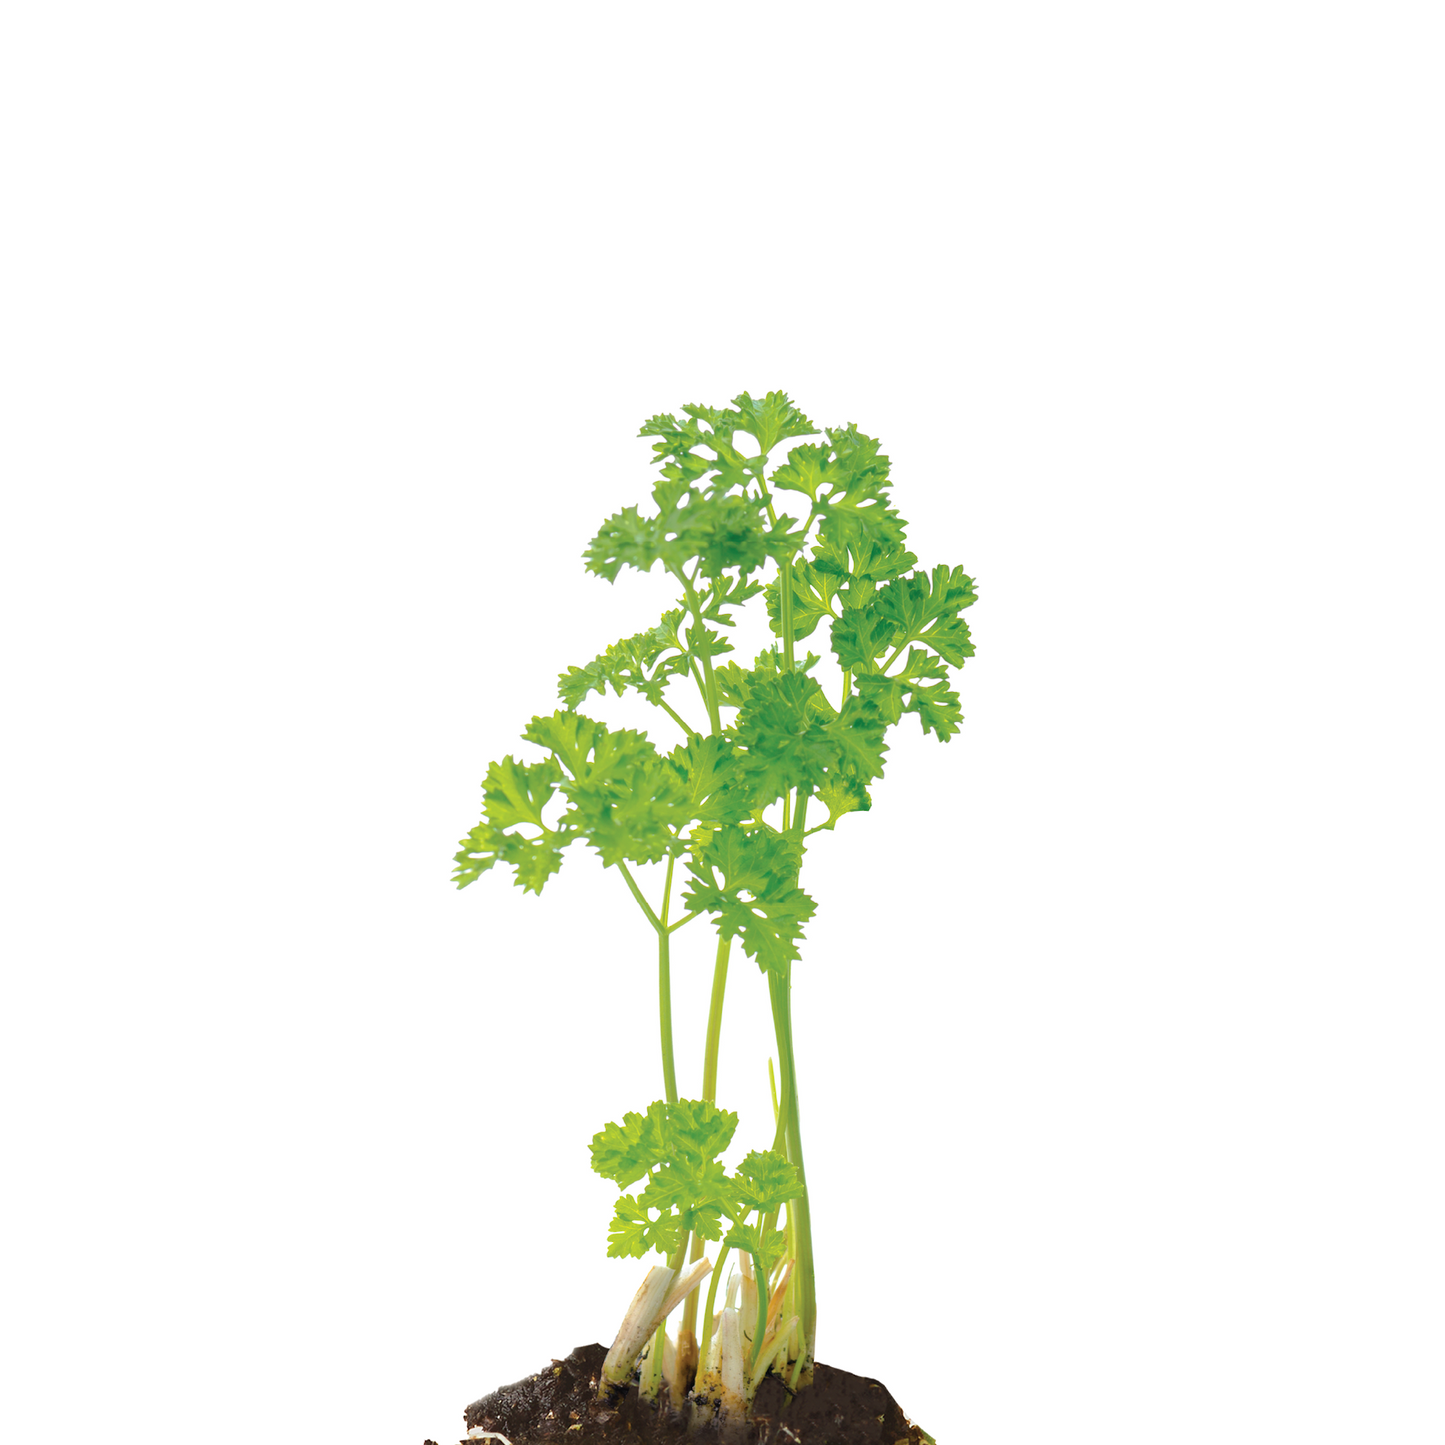 Parsley Giant Of Italy Plantlings Live Baby Plants 1-3in., 3-Pack